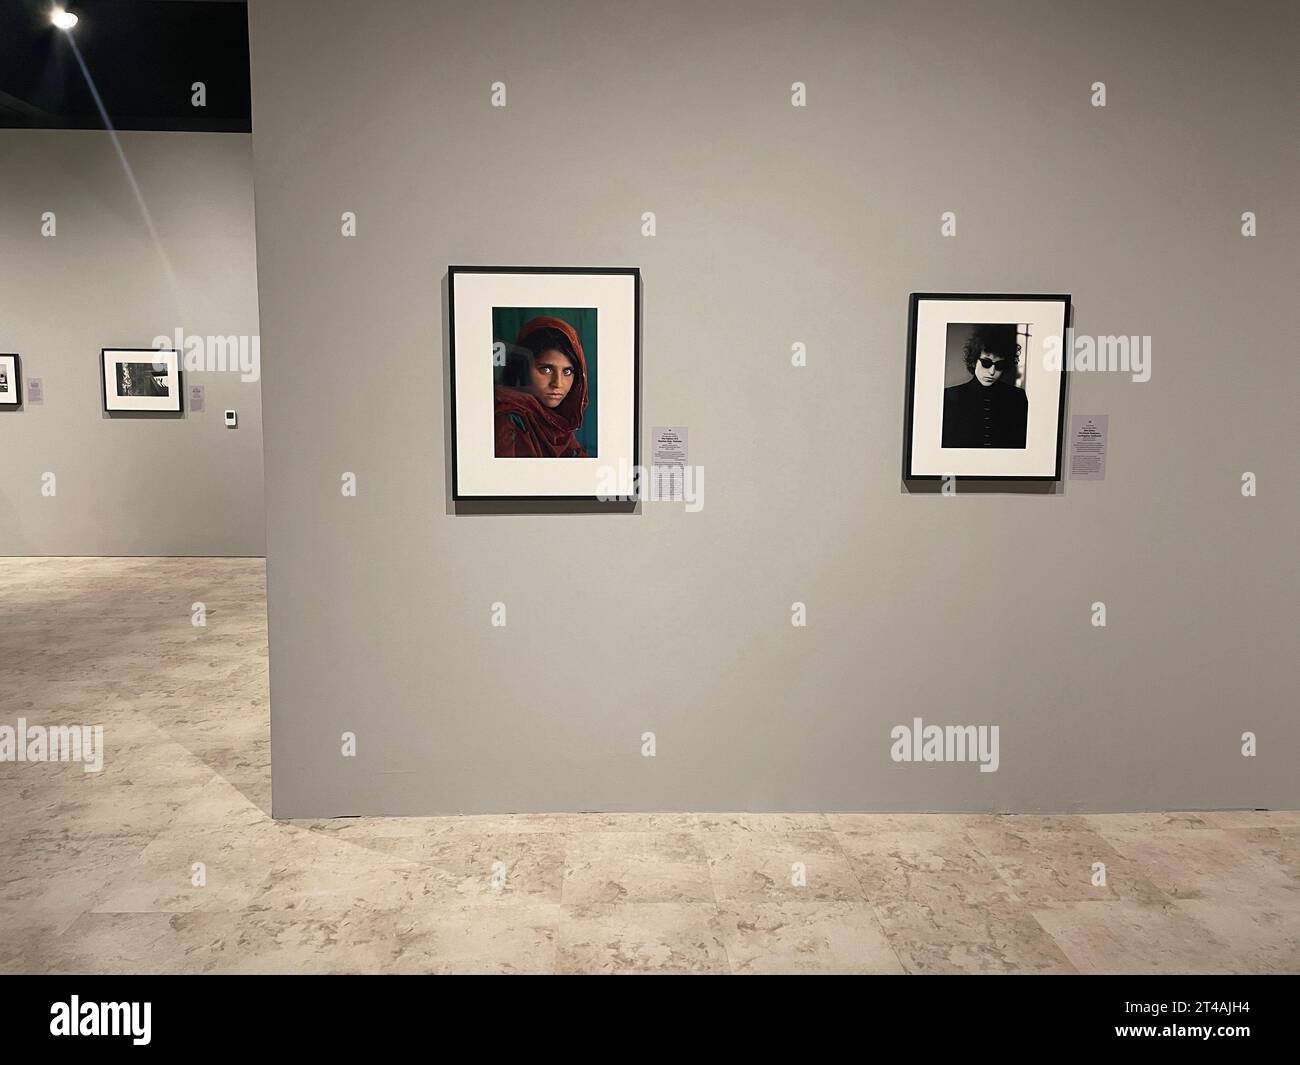 Iconic photographs on display in an exhibition of fine art photography titled The Power of Photography at the Bowers Museum in Santa Ana, Orange County, CA., USA Stock Photo